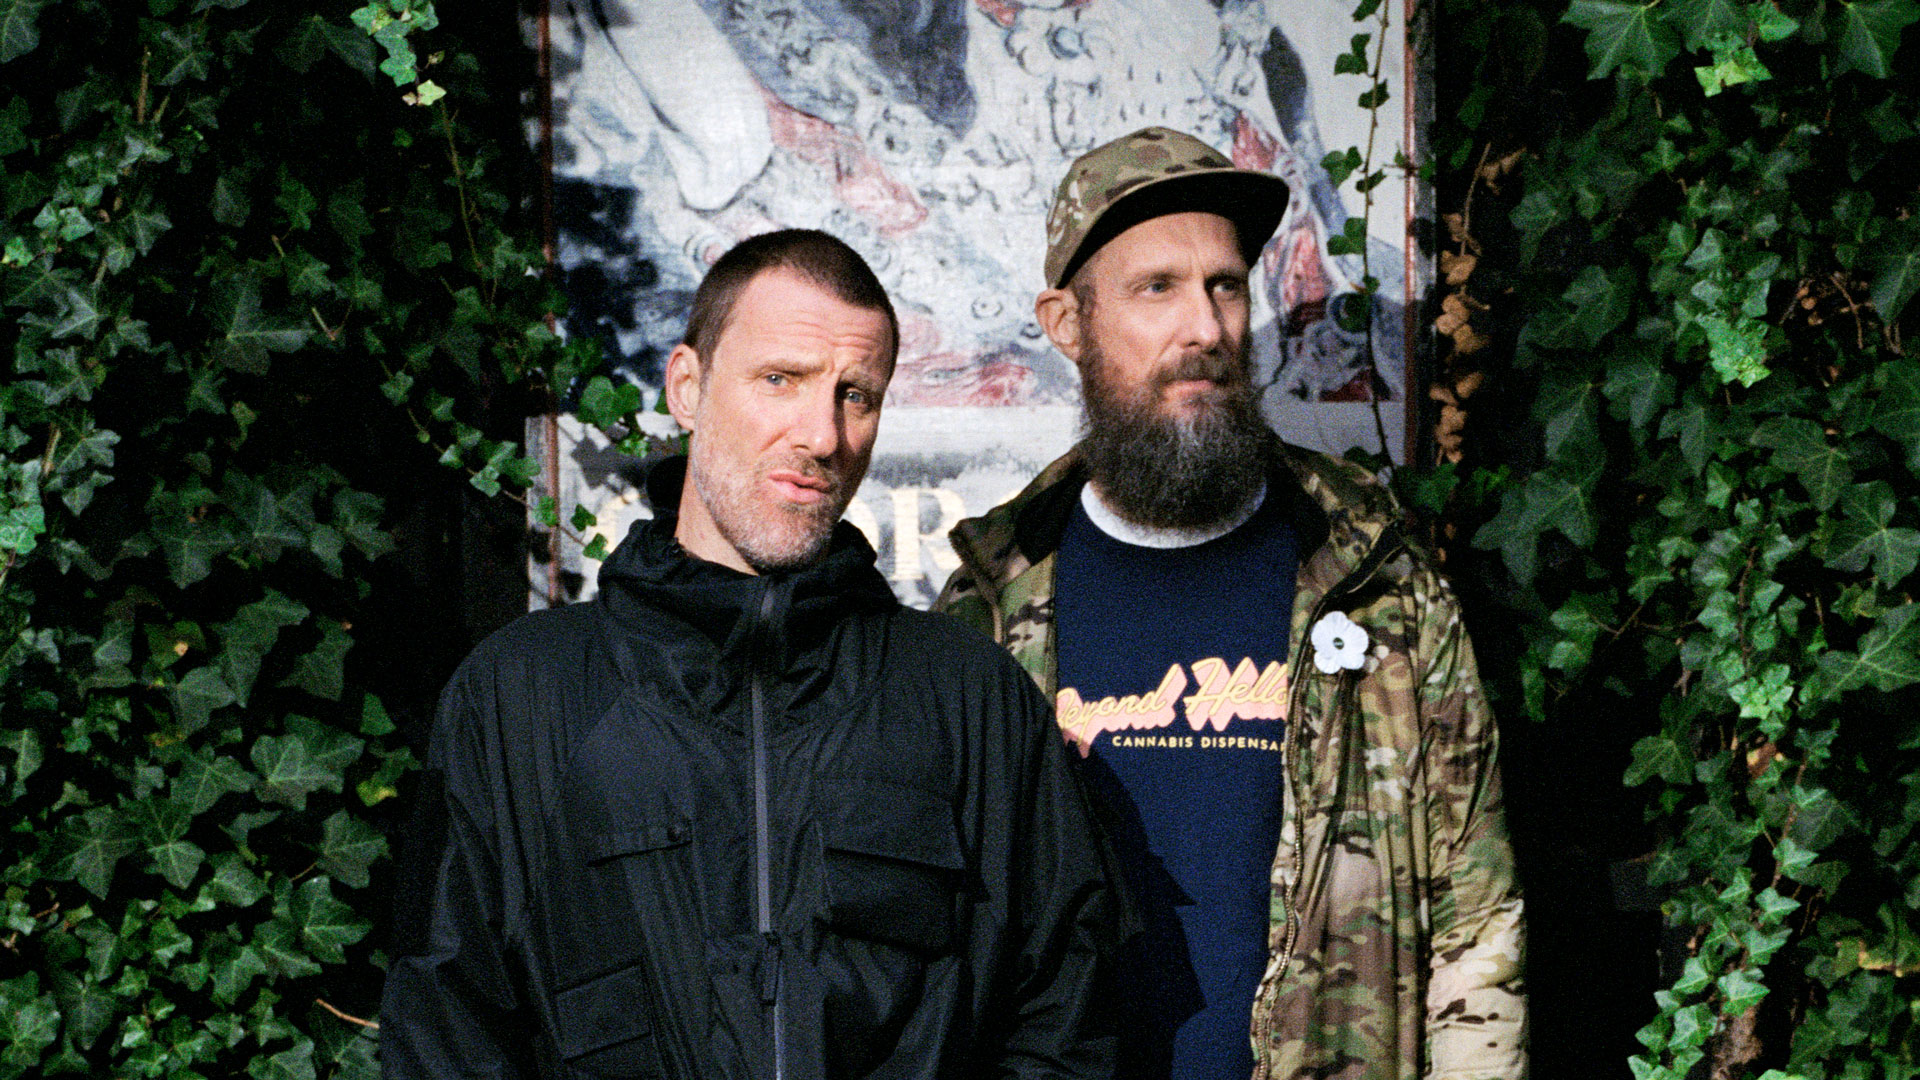 Sleaford Mods have released West End Girls by Pet Shop Boys for homelessness charity Shelter